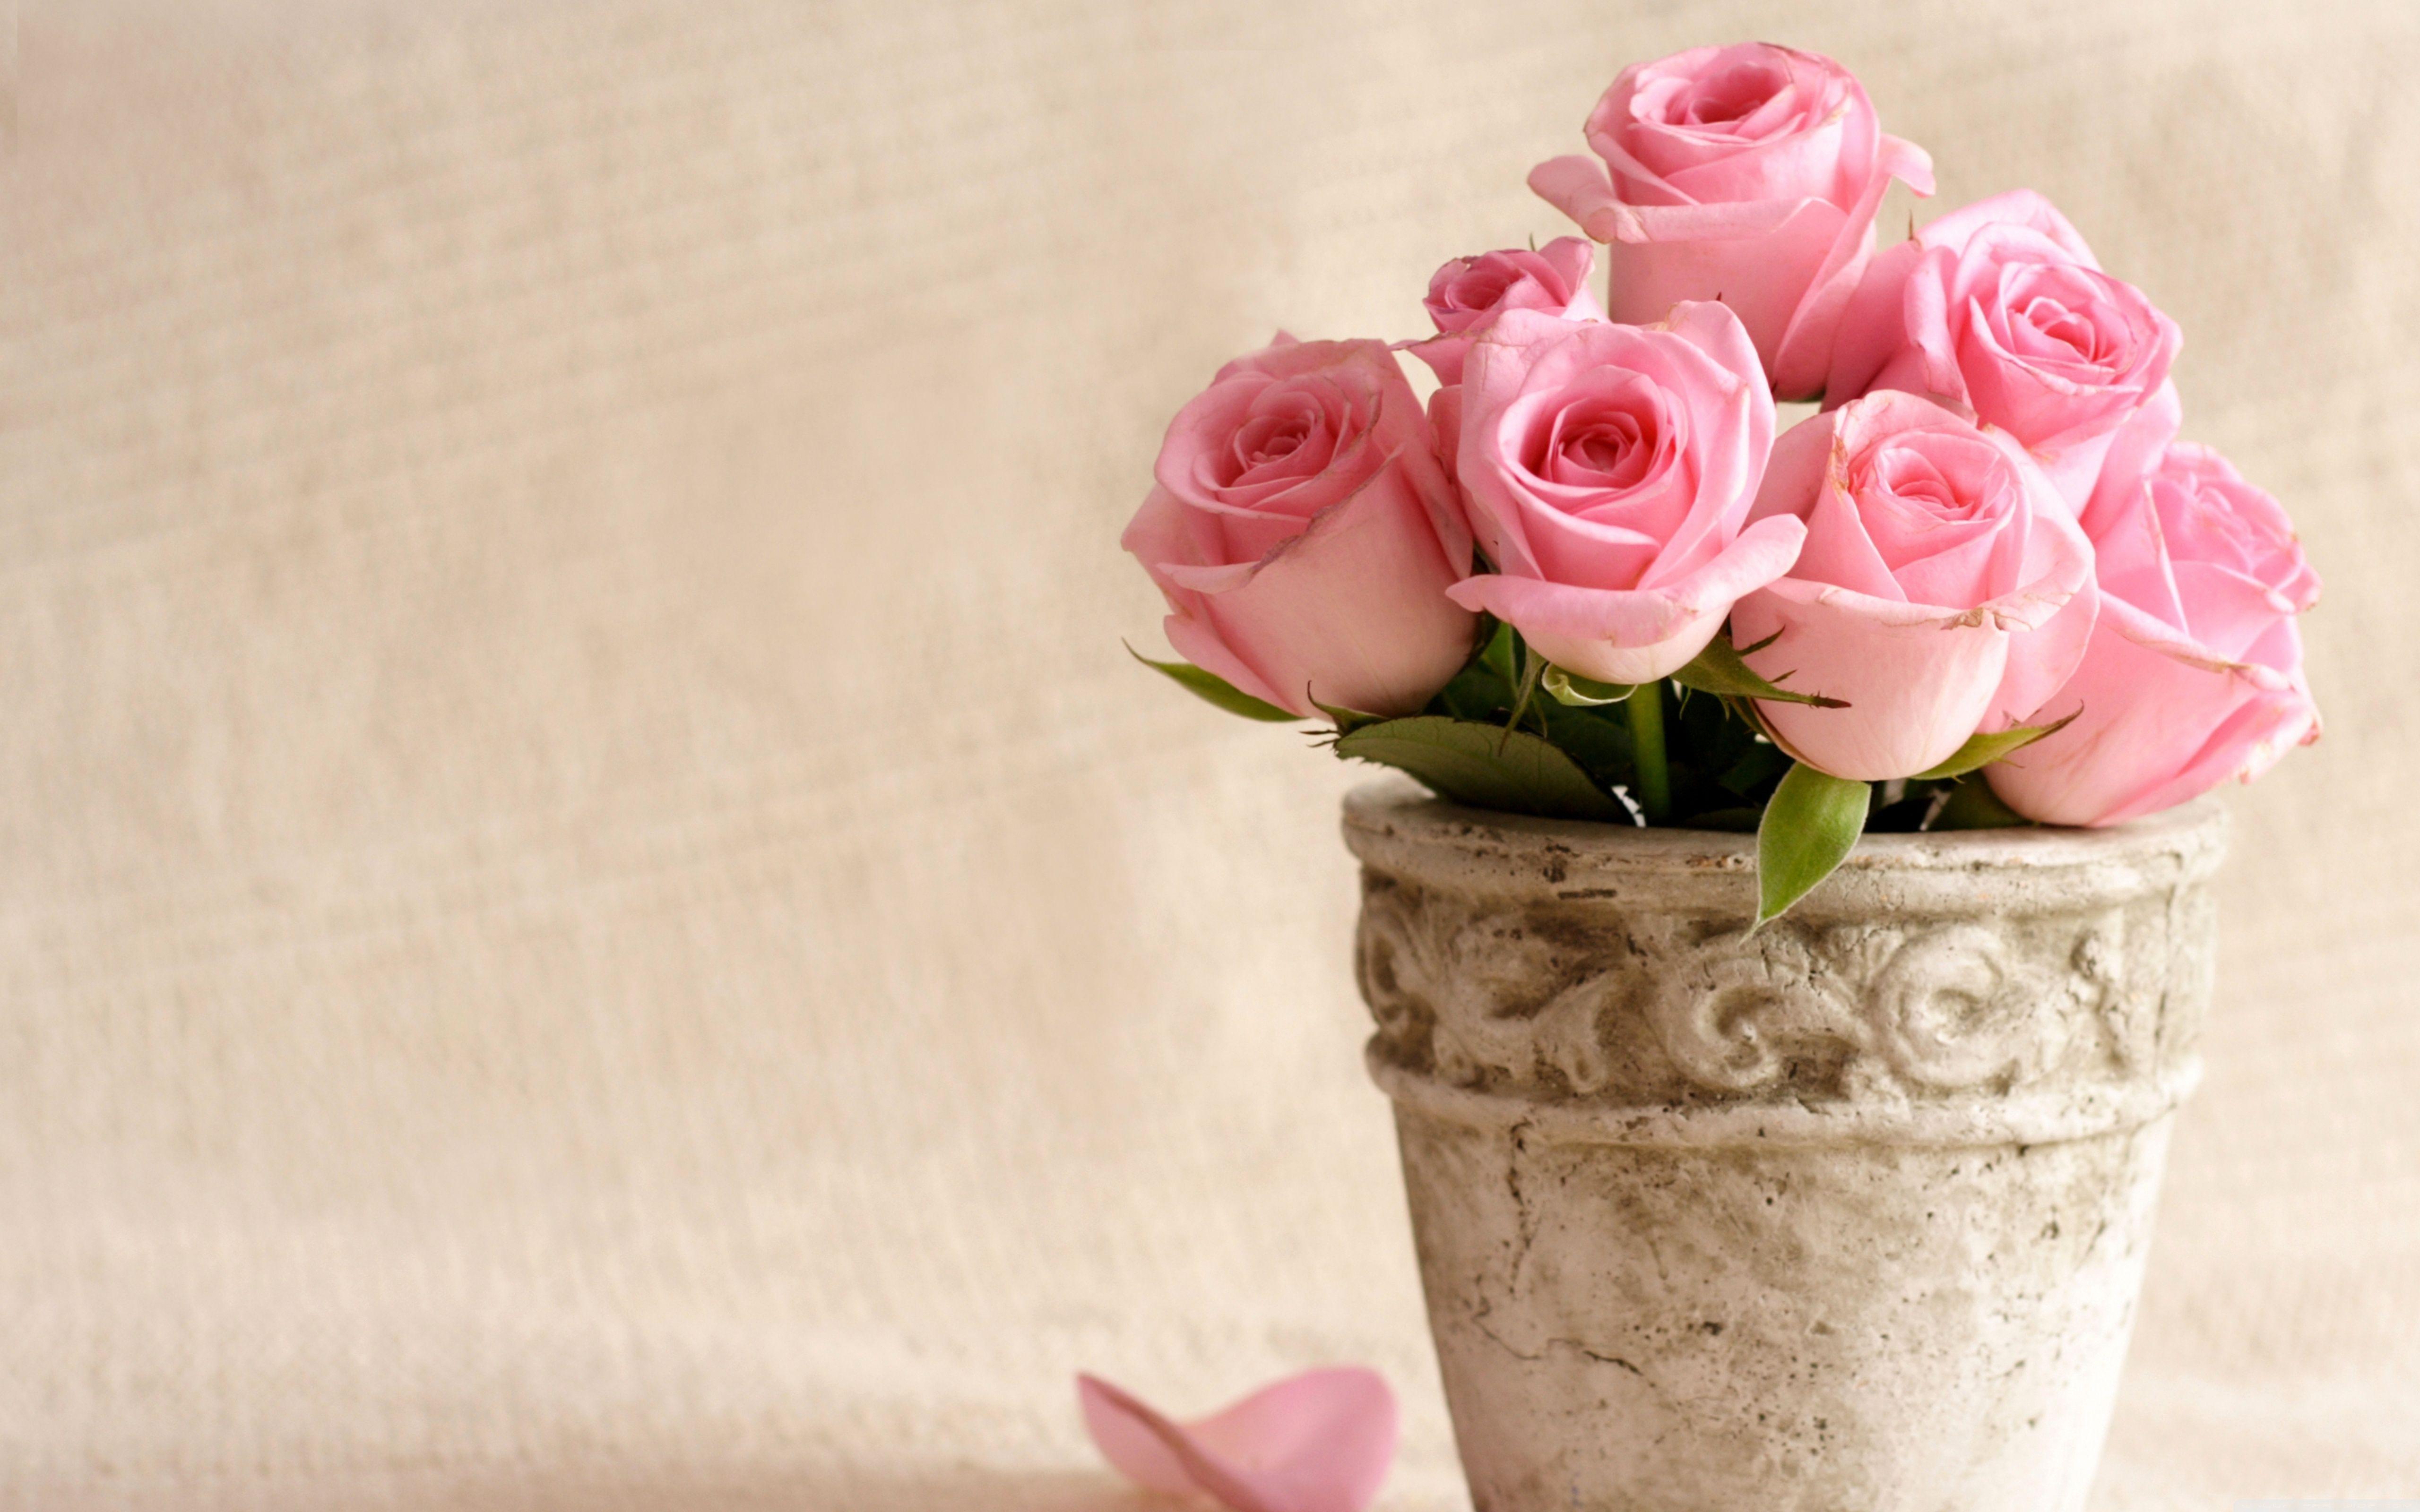 Cute Pink Rose Flower HD Wallpaper High Quality Photo Roses